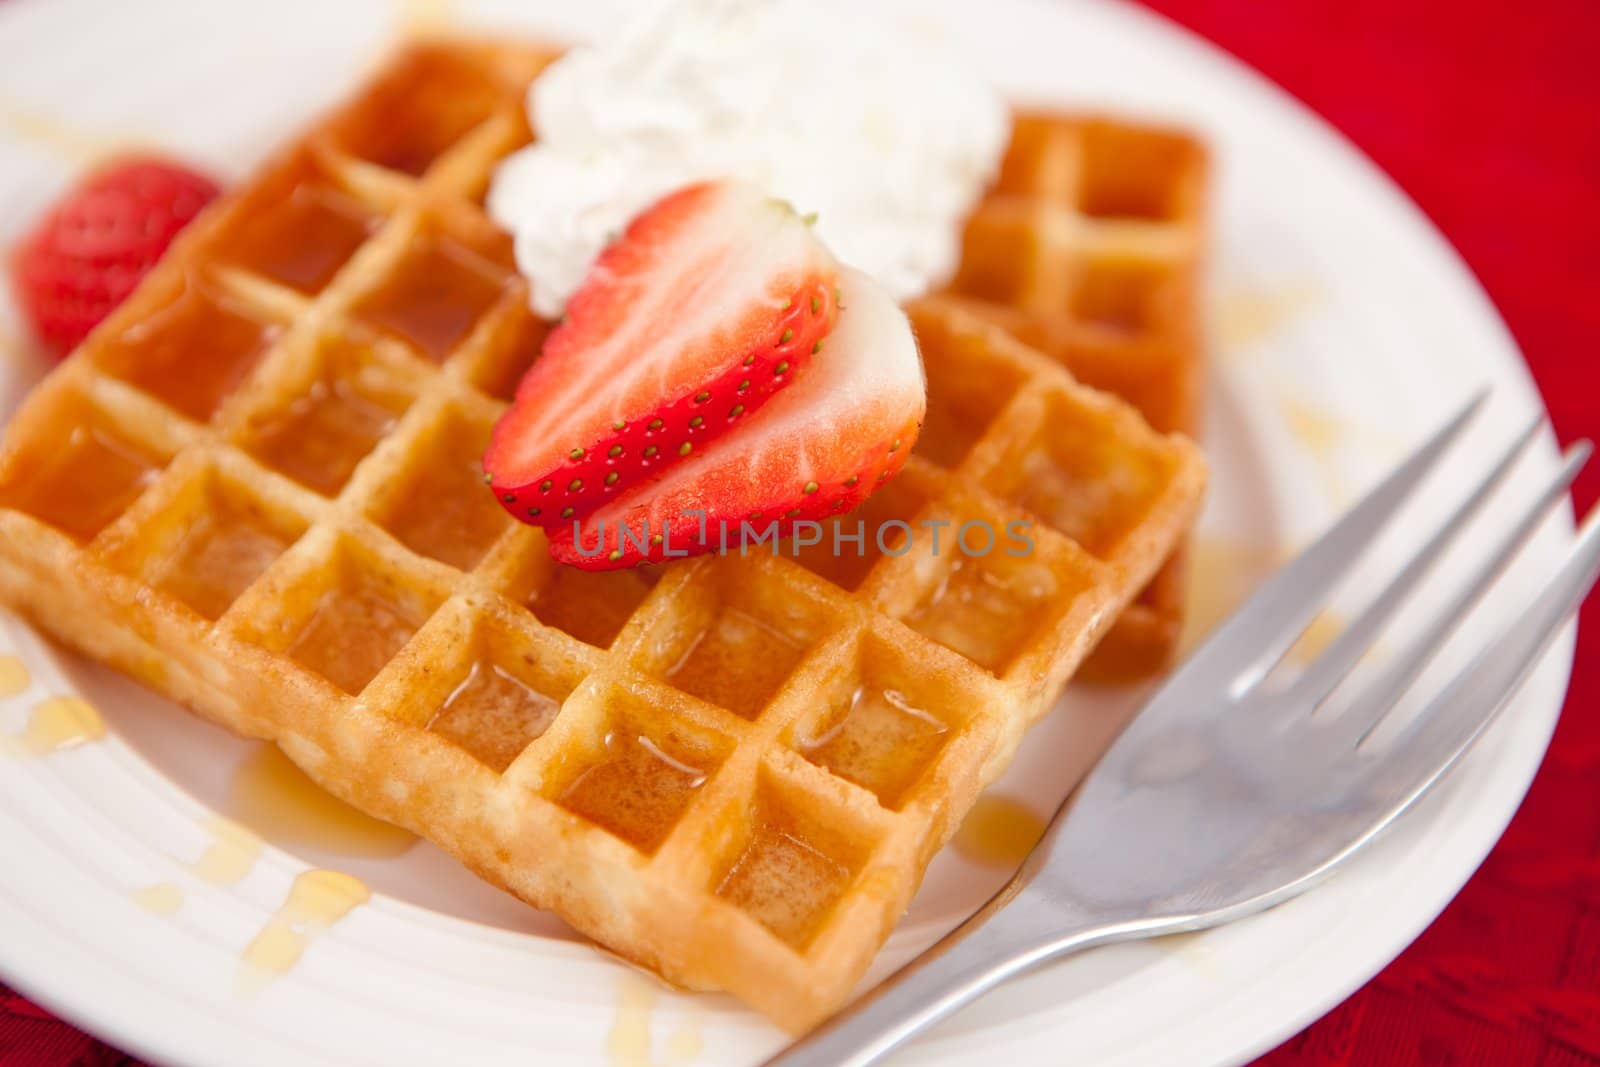 Waffles with whipped cream and strawberry on it on a red napkin